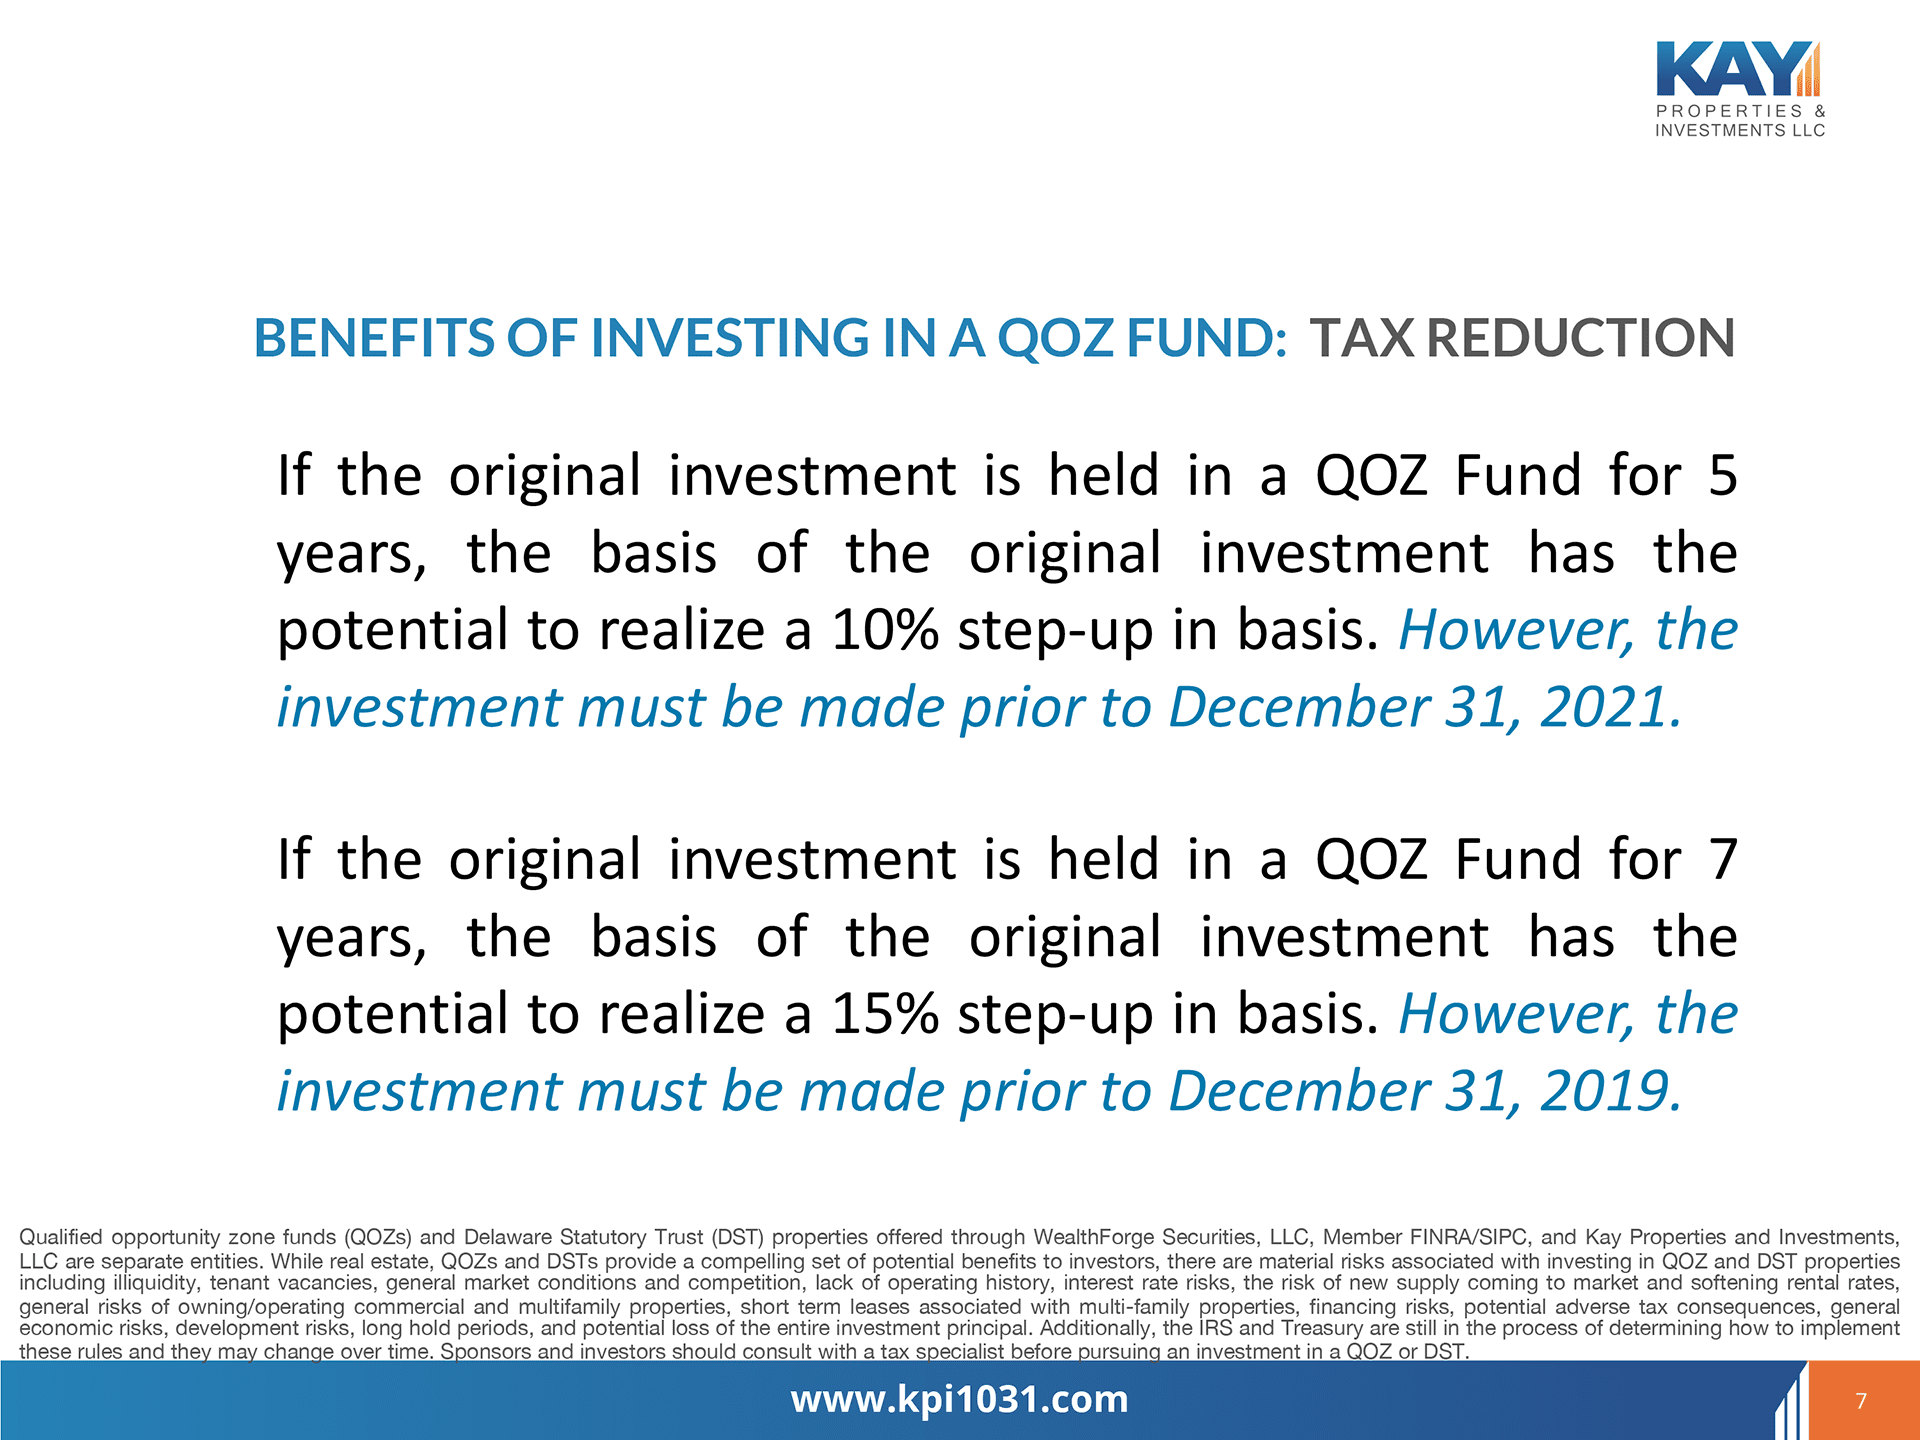 Tax Defferal with a QOZ Fund | Kay Properties